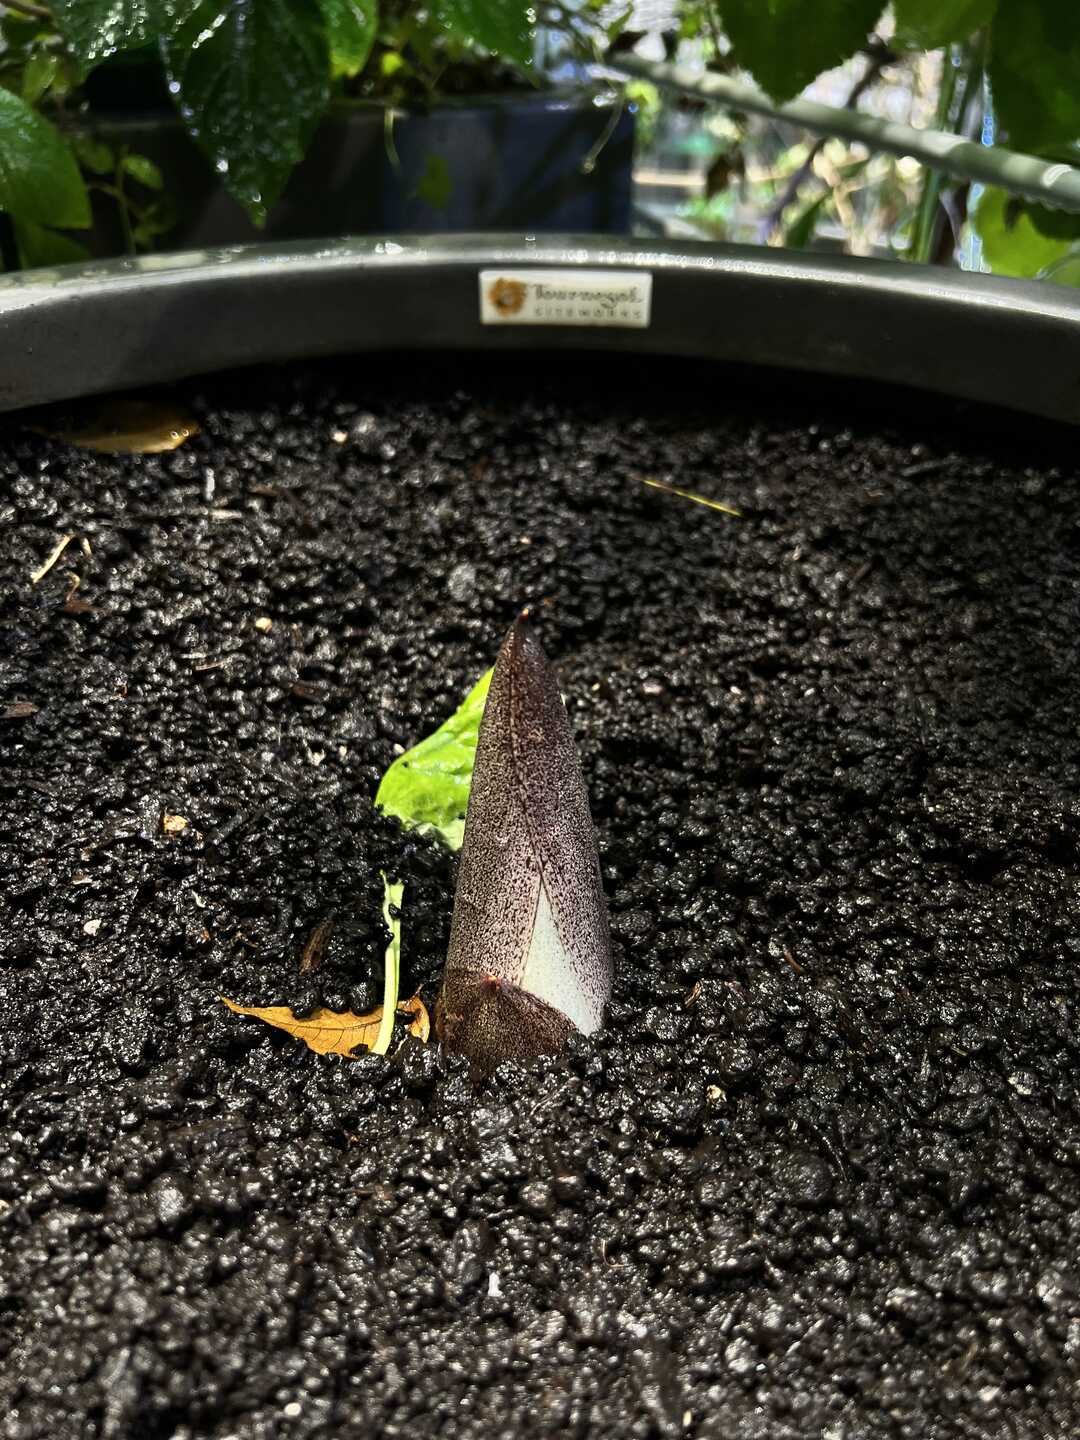 Mirage the corpse flower starting to bud